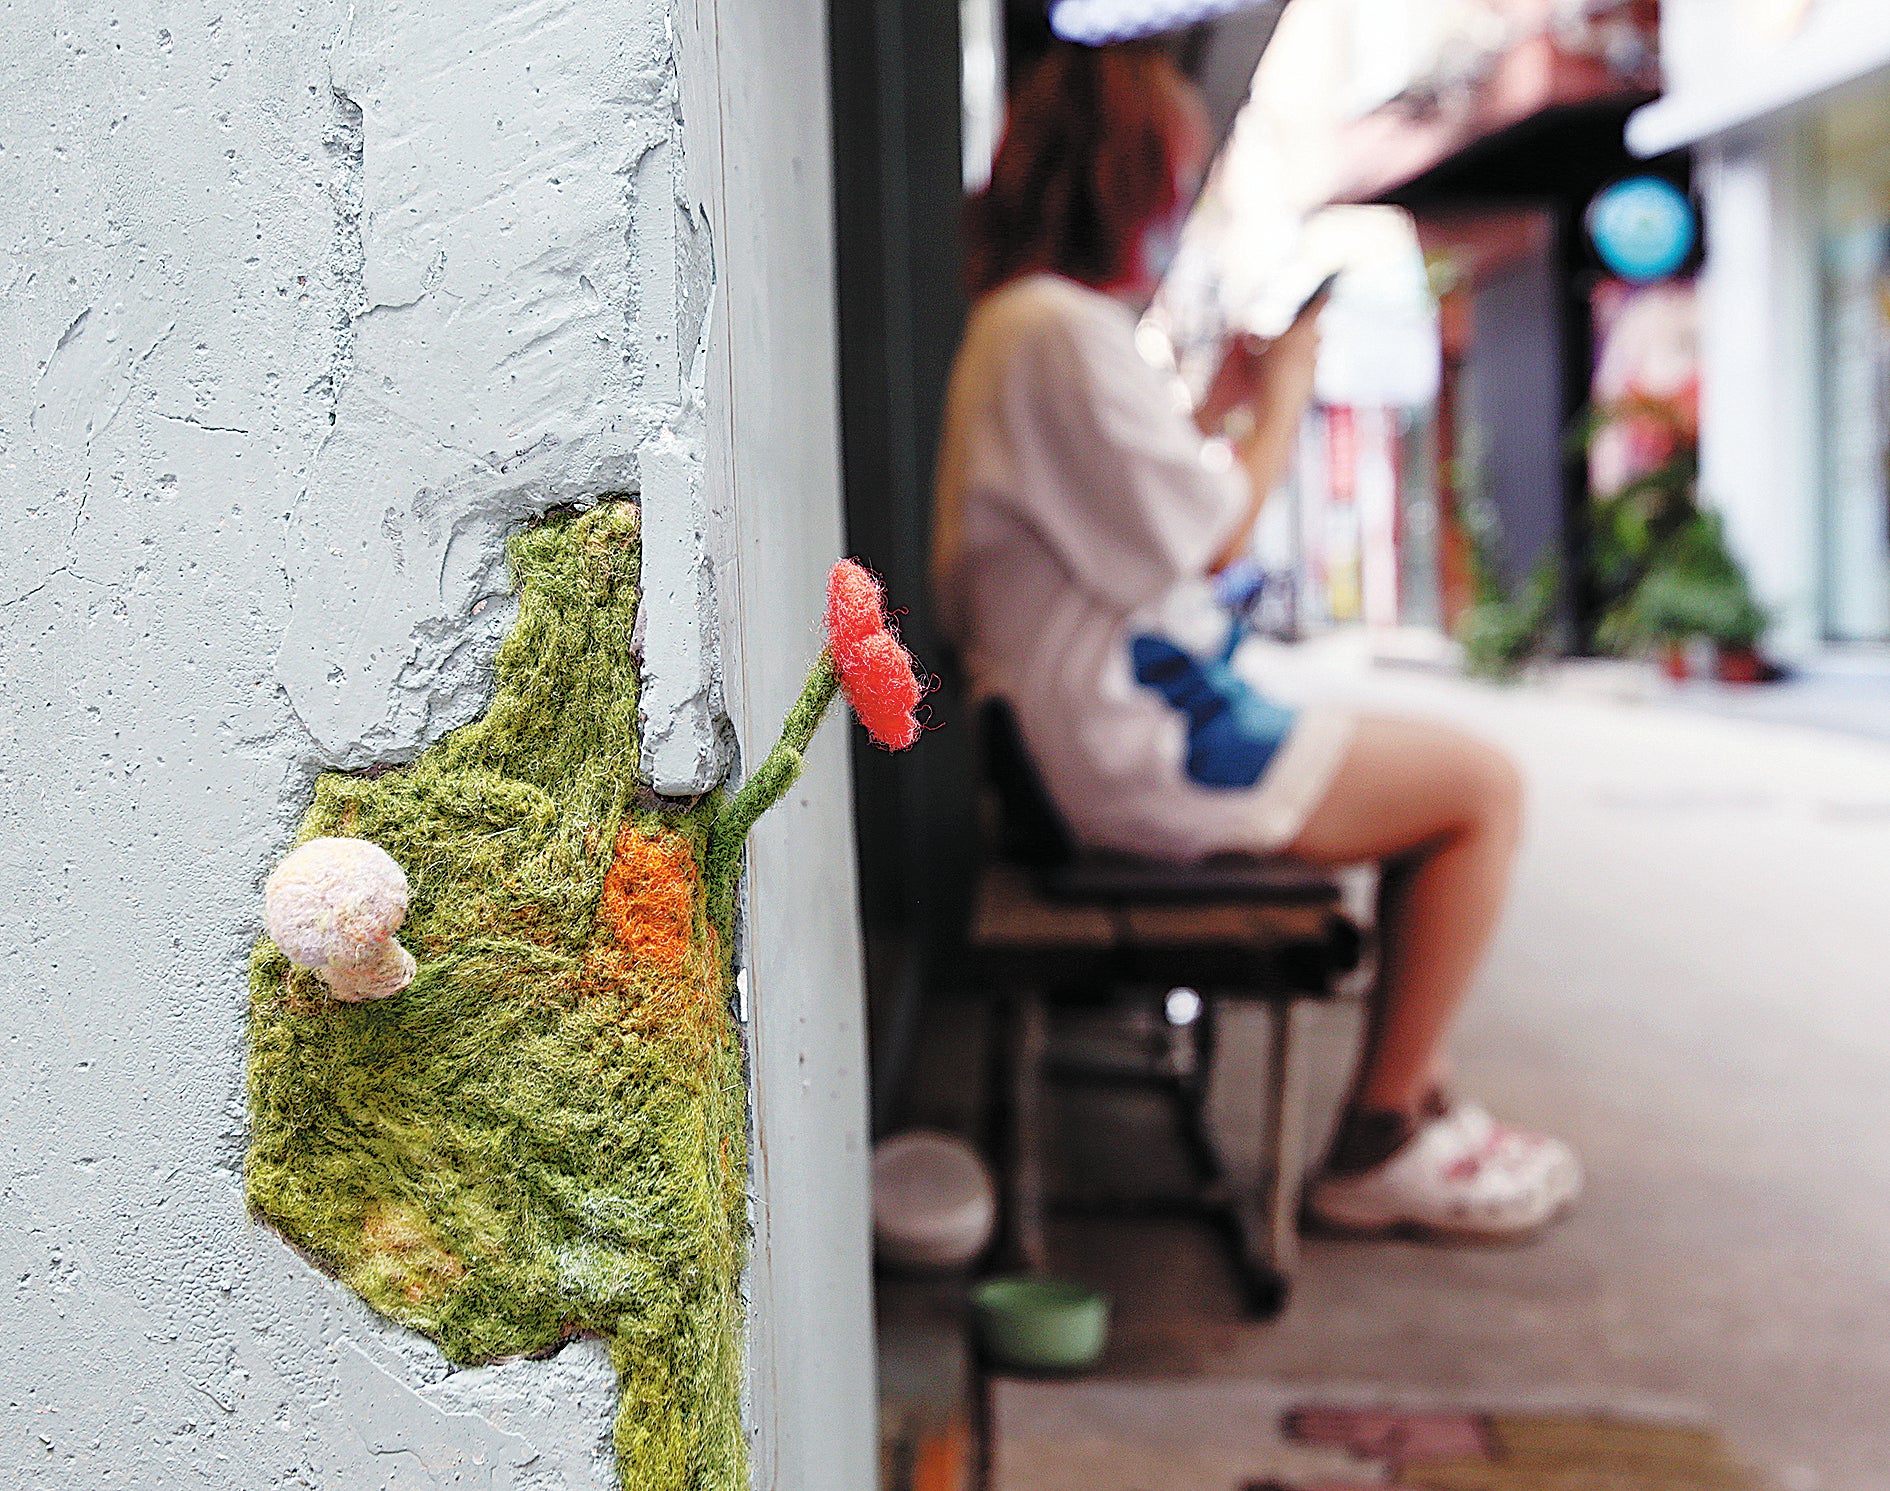 A flower and a mushroom made of felt are installed in a broken wall in Nanting village in Guangzhou